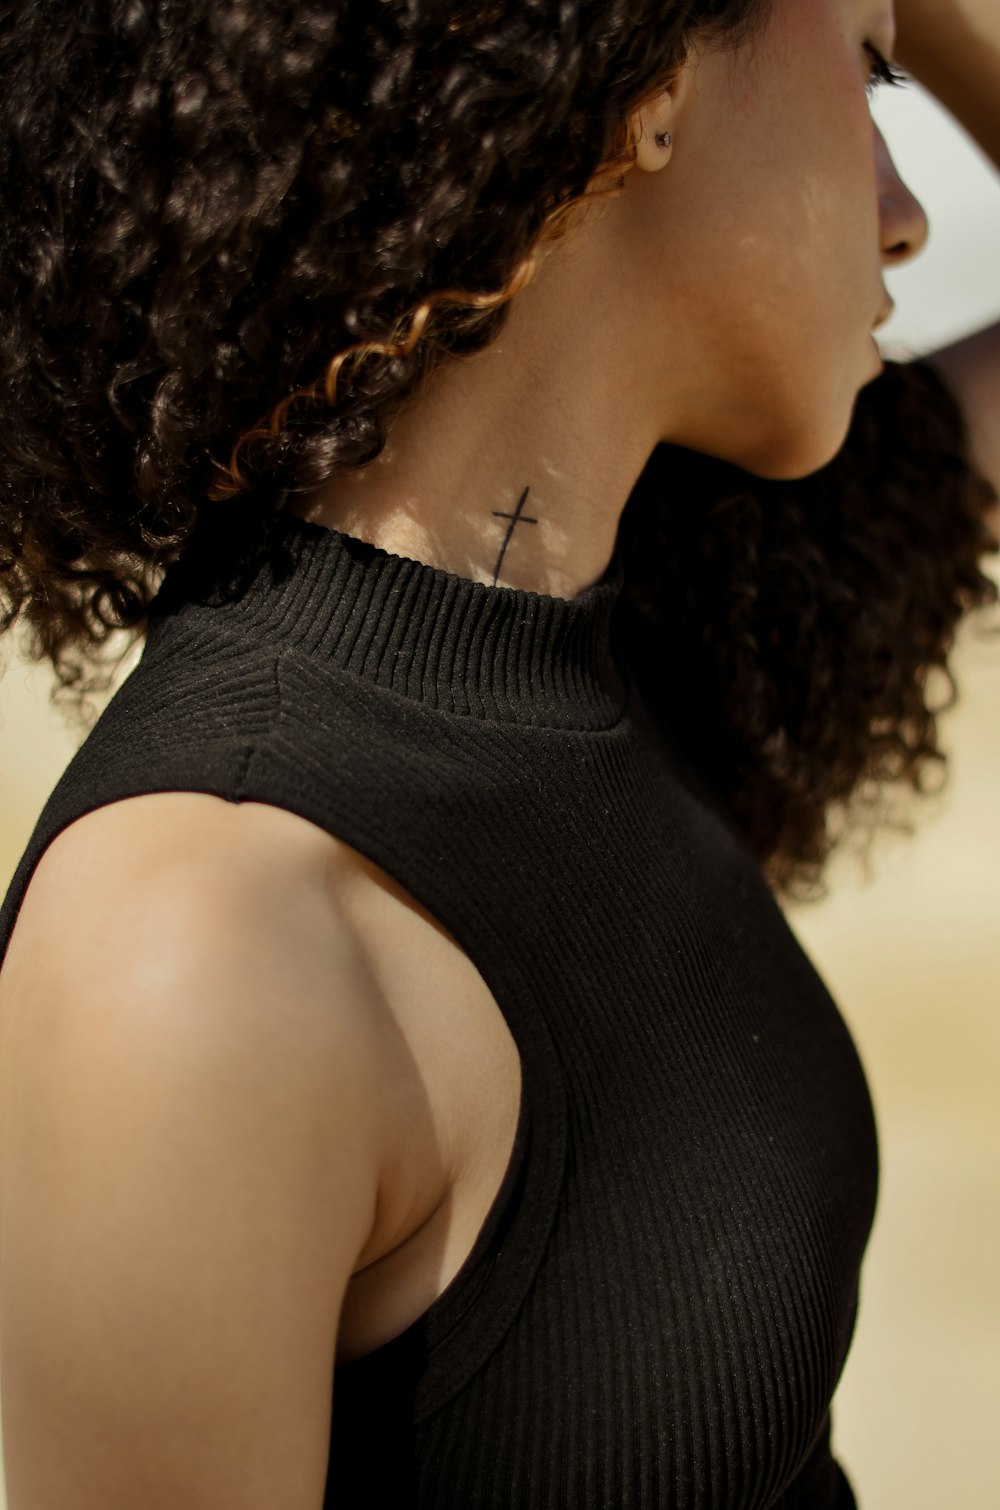 a woman with a cross tattoo on her neck